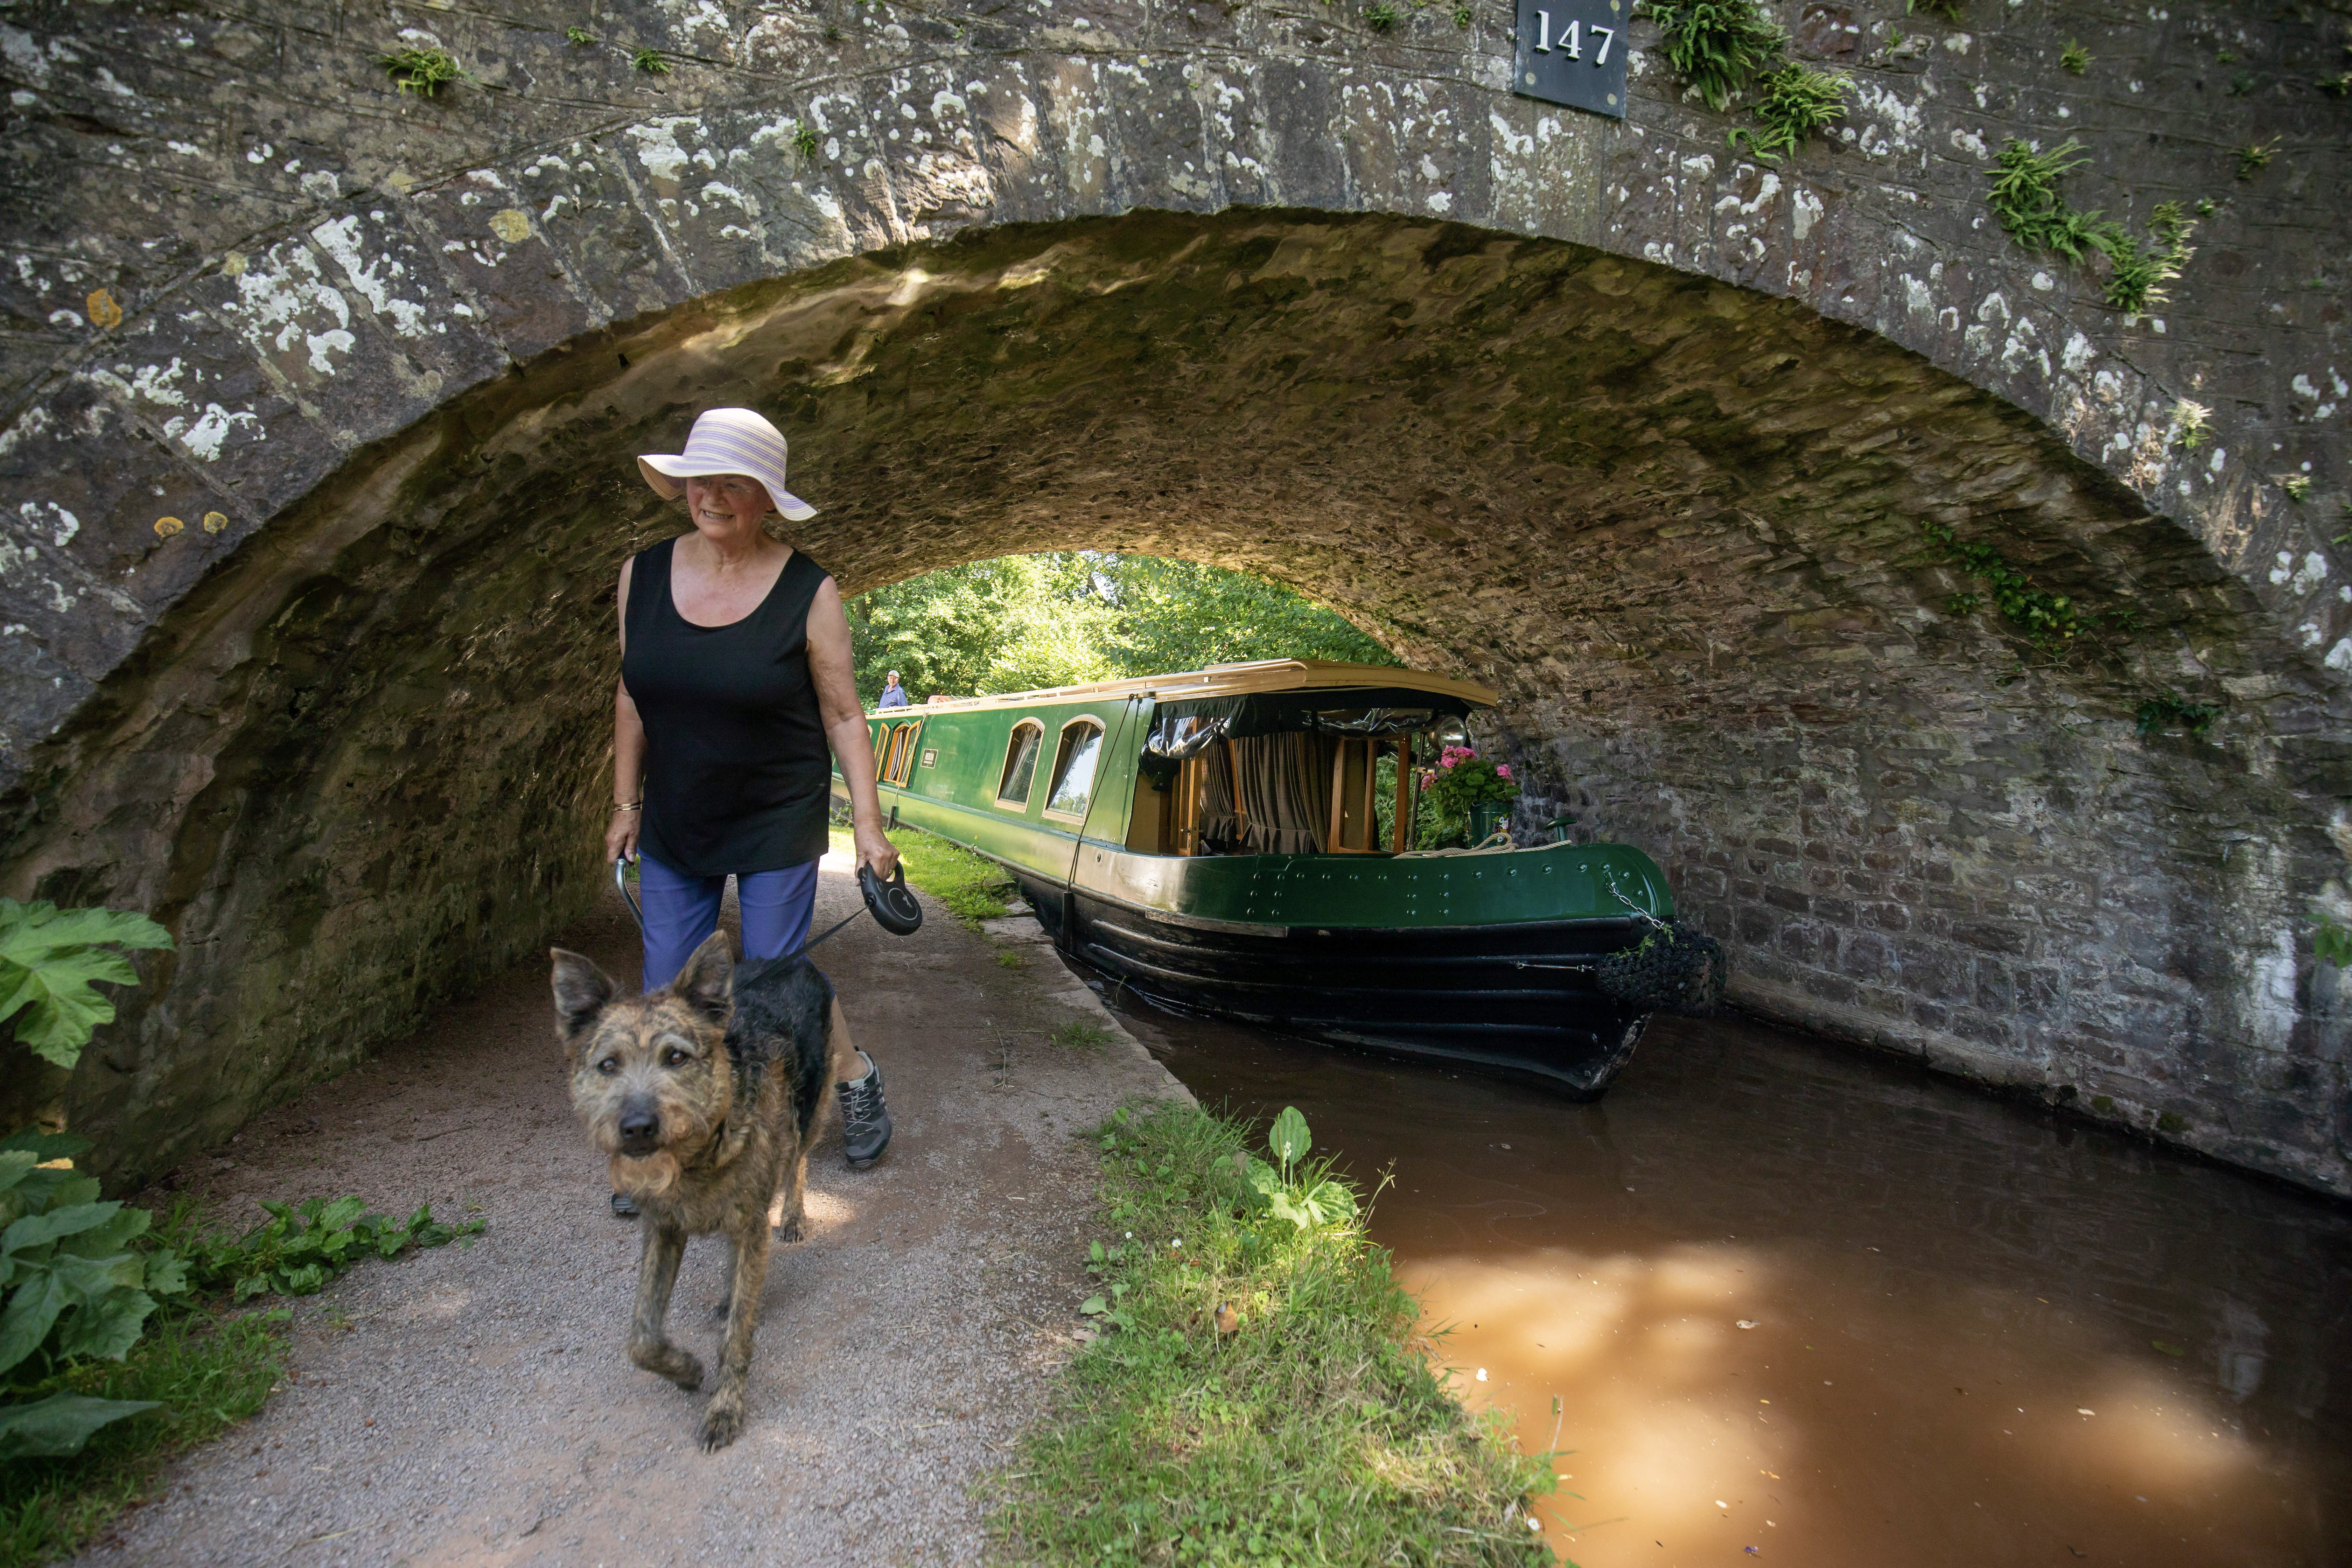 a dog with its owner walking on the towpath of the mon and brec canal alongside their narrowboat